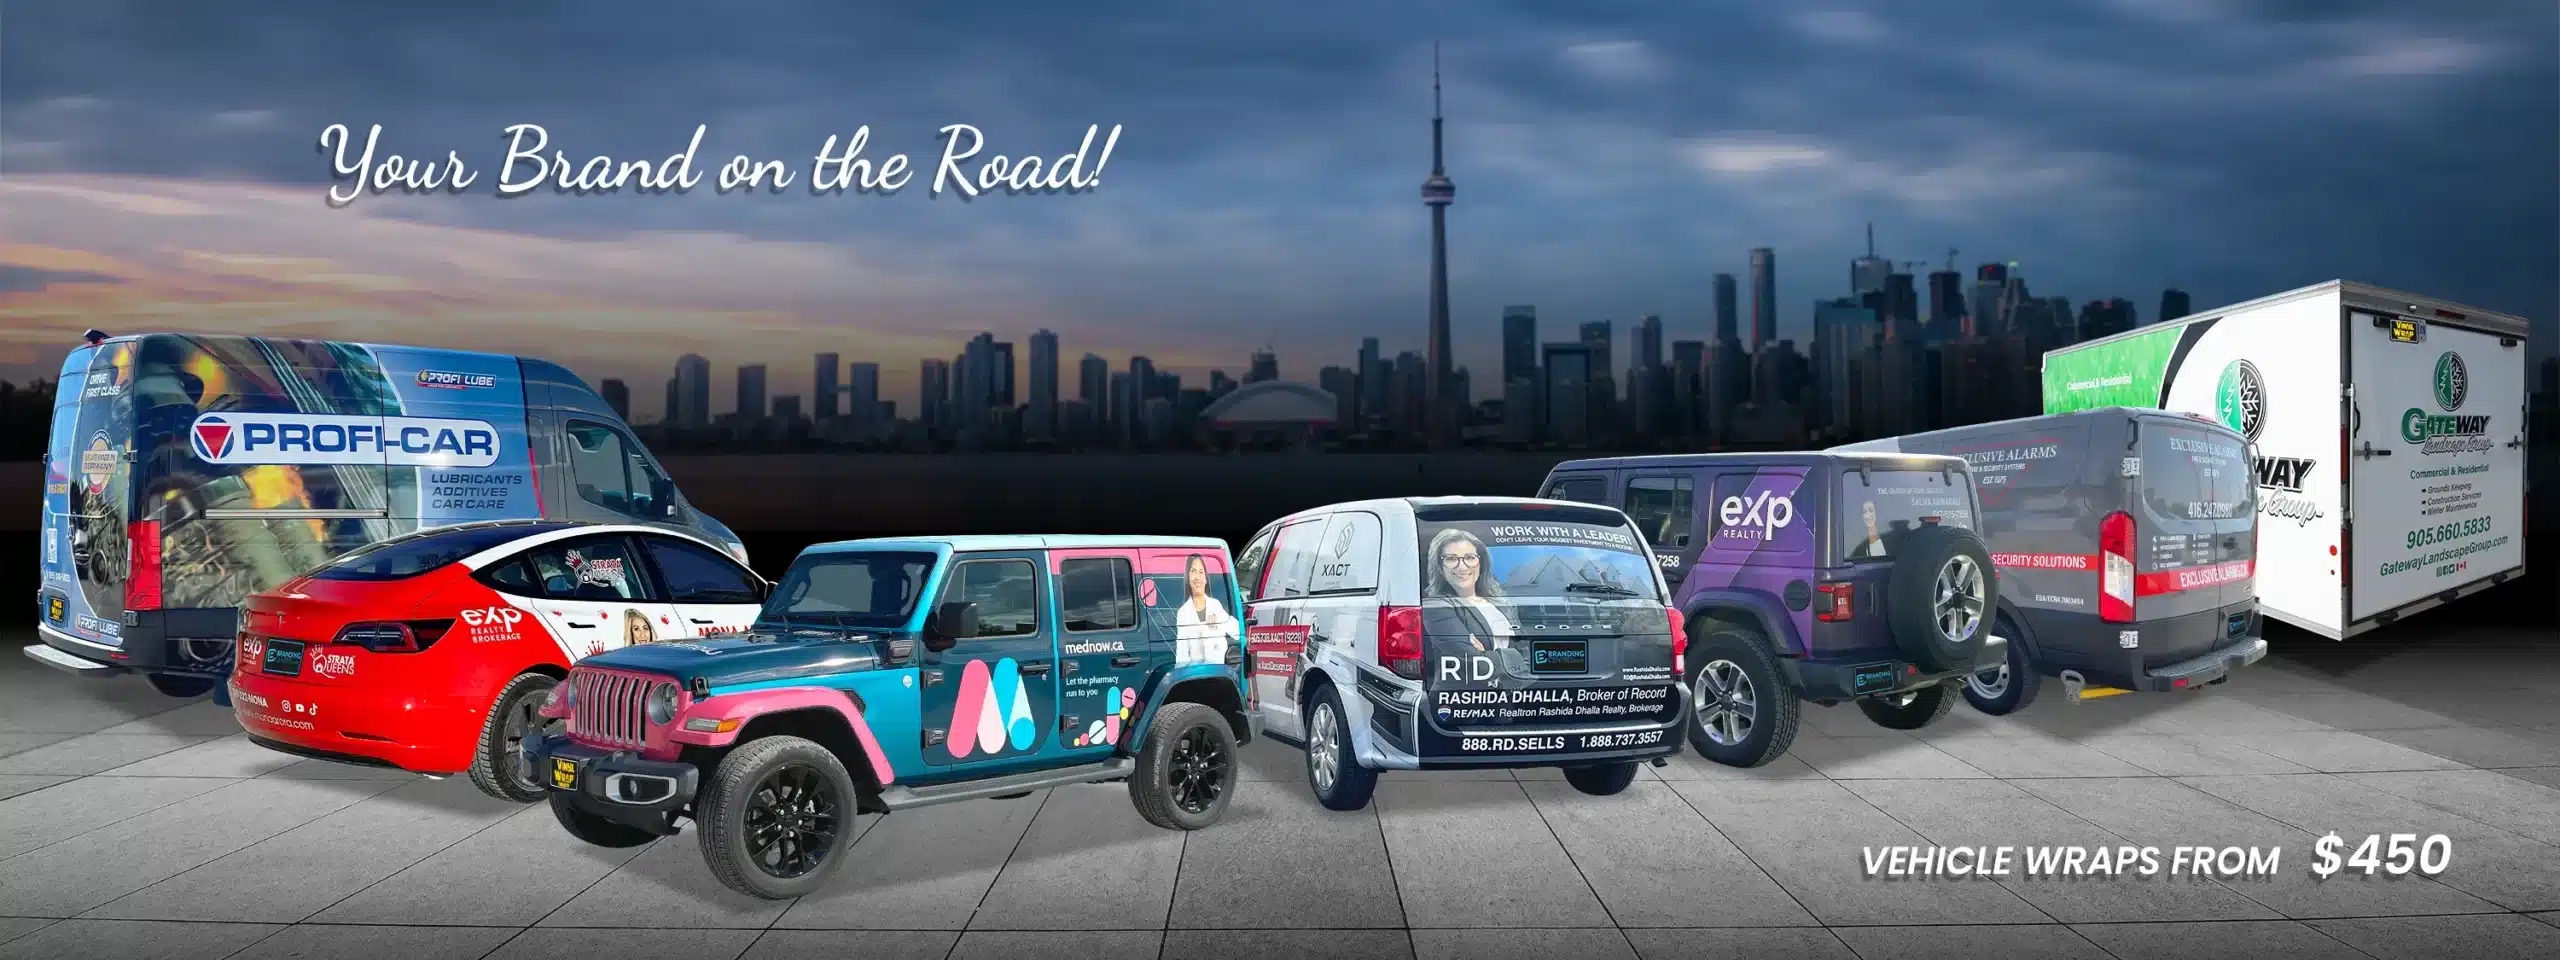 Vehicle Wraps in Toronto - Car, Truck, Van wraps in GTA - Avery Dennison and 3M - COmmercial and Personal - Updated